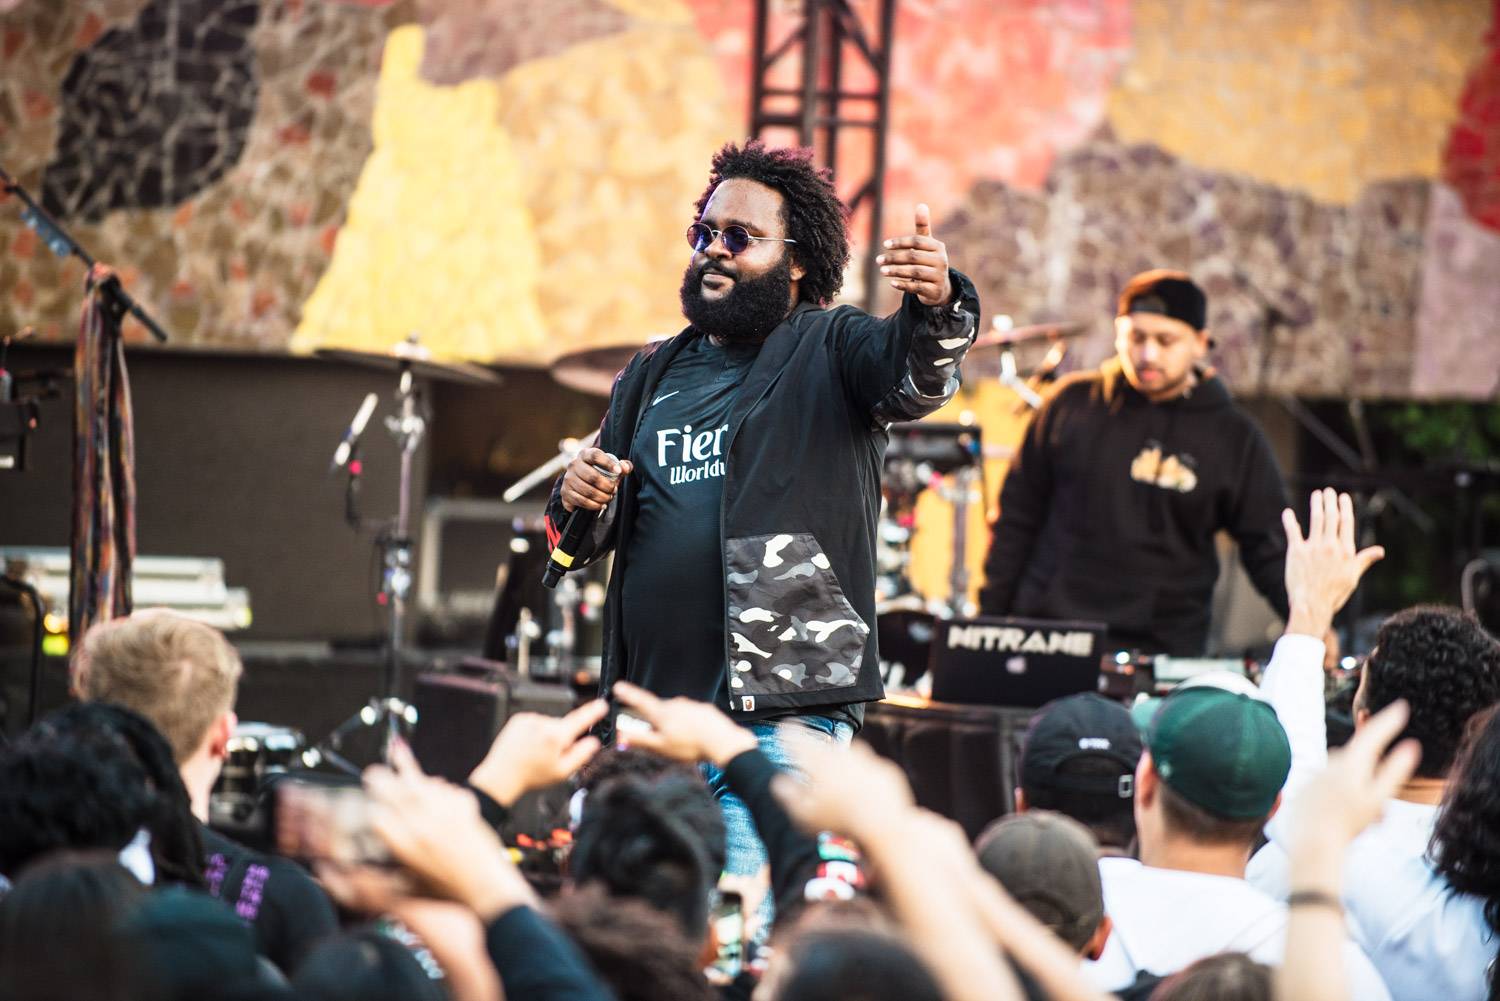 Bas at the Bumbershoot Music Festival 2018 - Day 2. Sept 1 2018. Pavel Boiko photo.